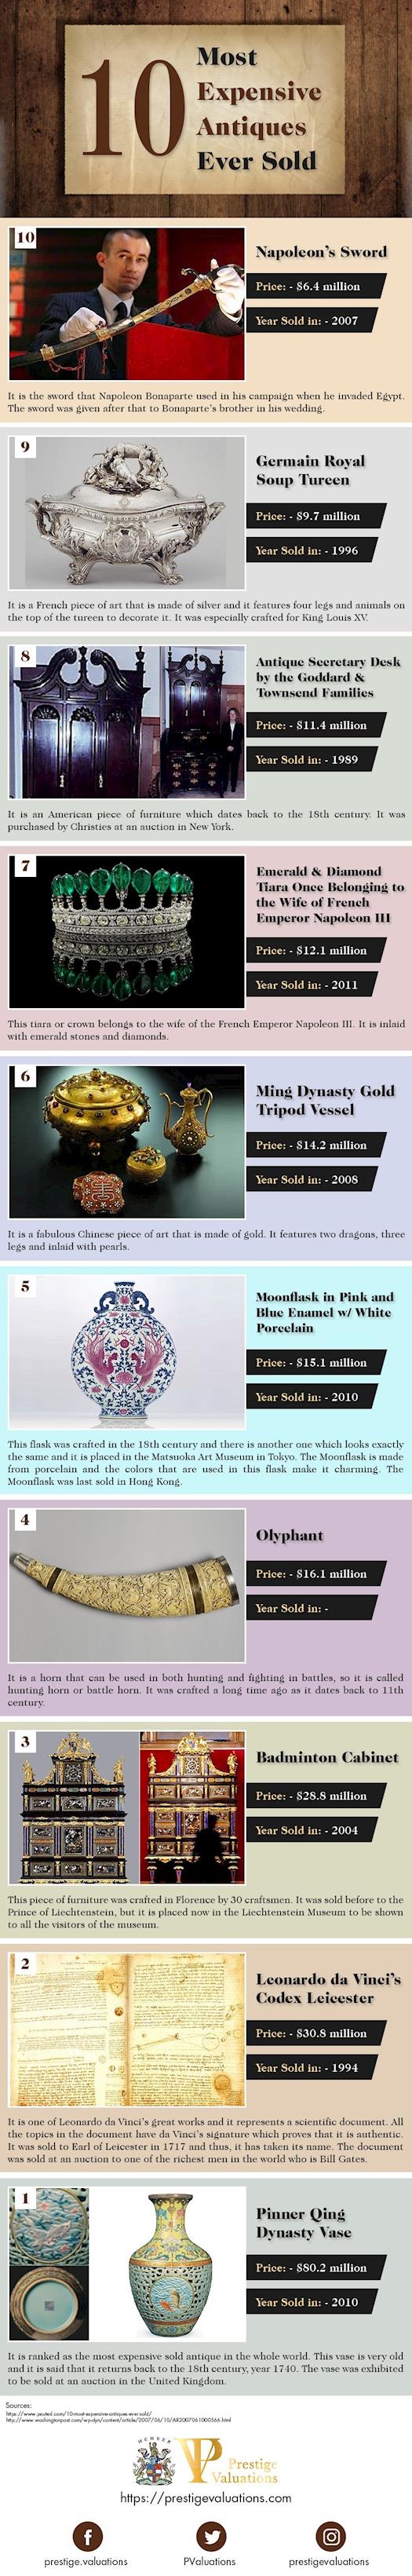 10 Most Expensive Antiques Ever Sold